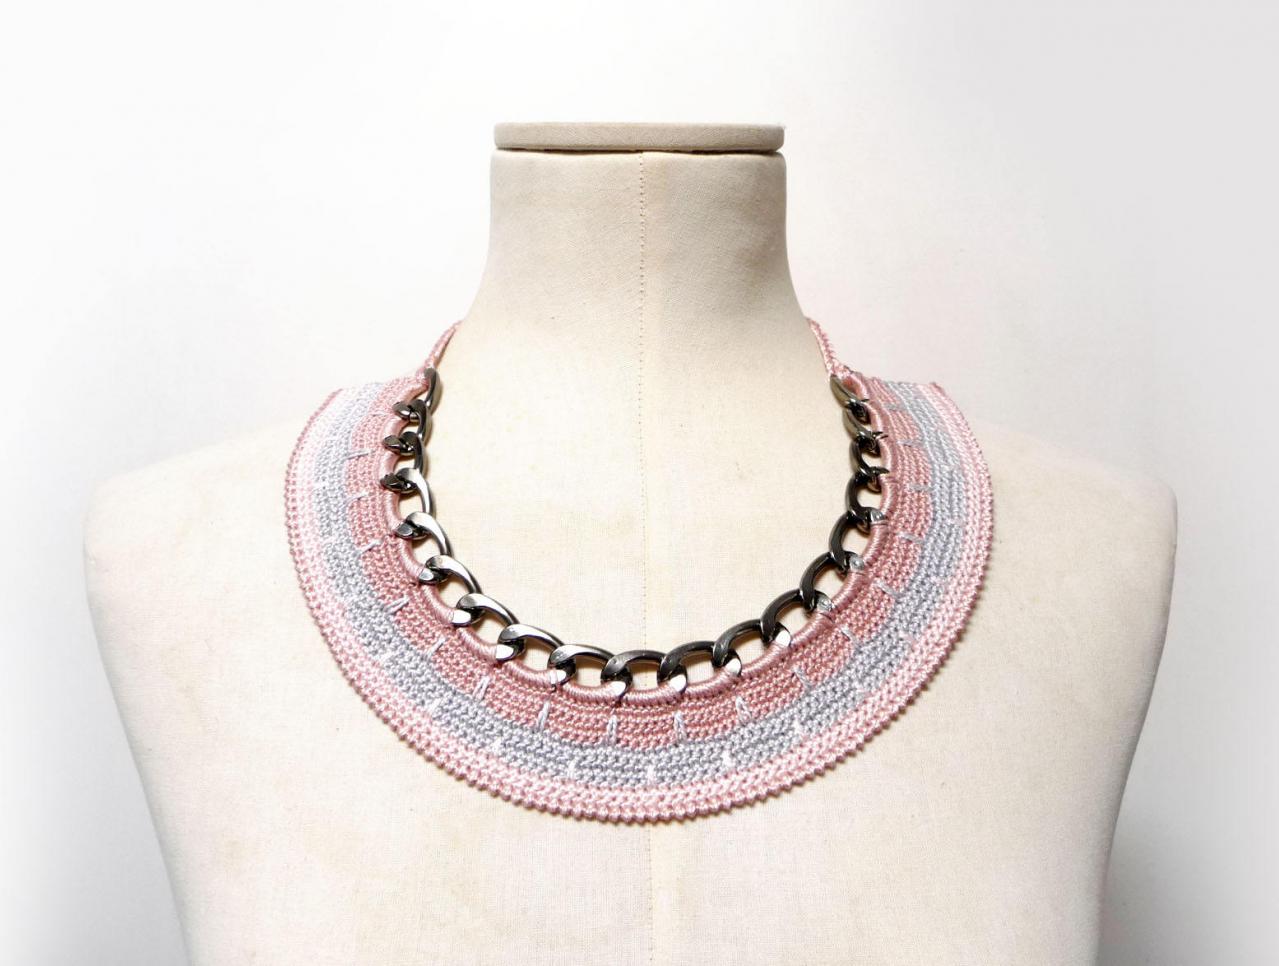 Crochet Cotton And Chain Necklace Choker - Pink Statement Necklace - Gunmetal Chain With Pink And Grey Cotton